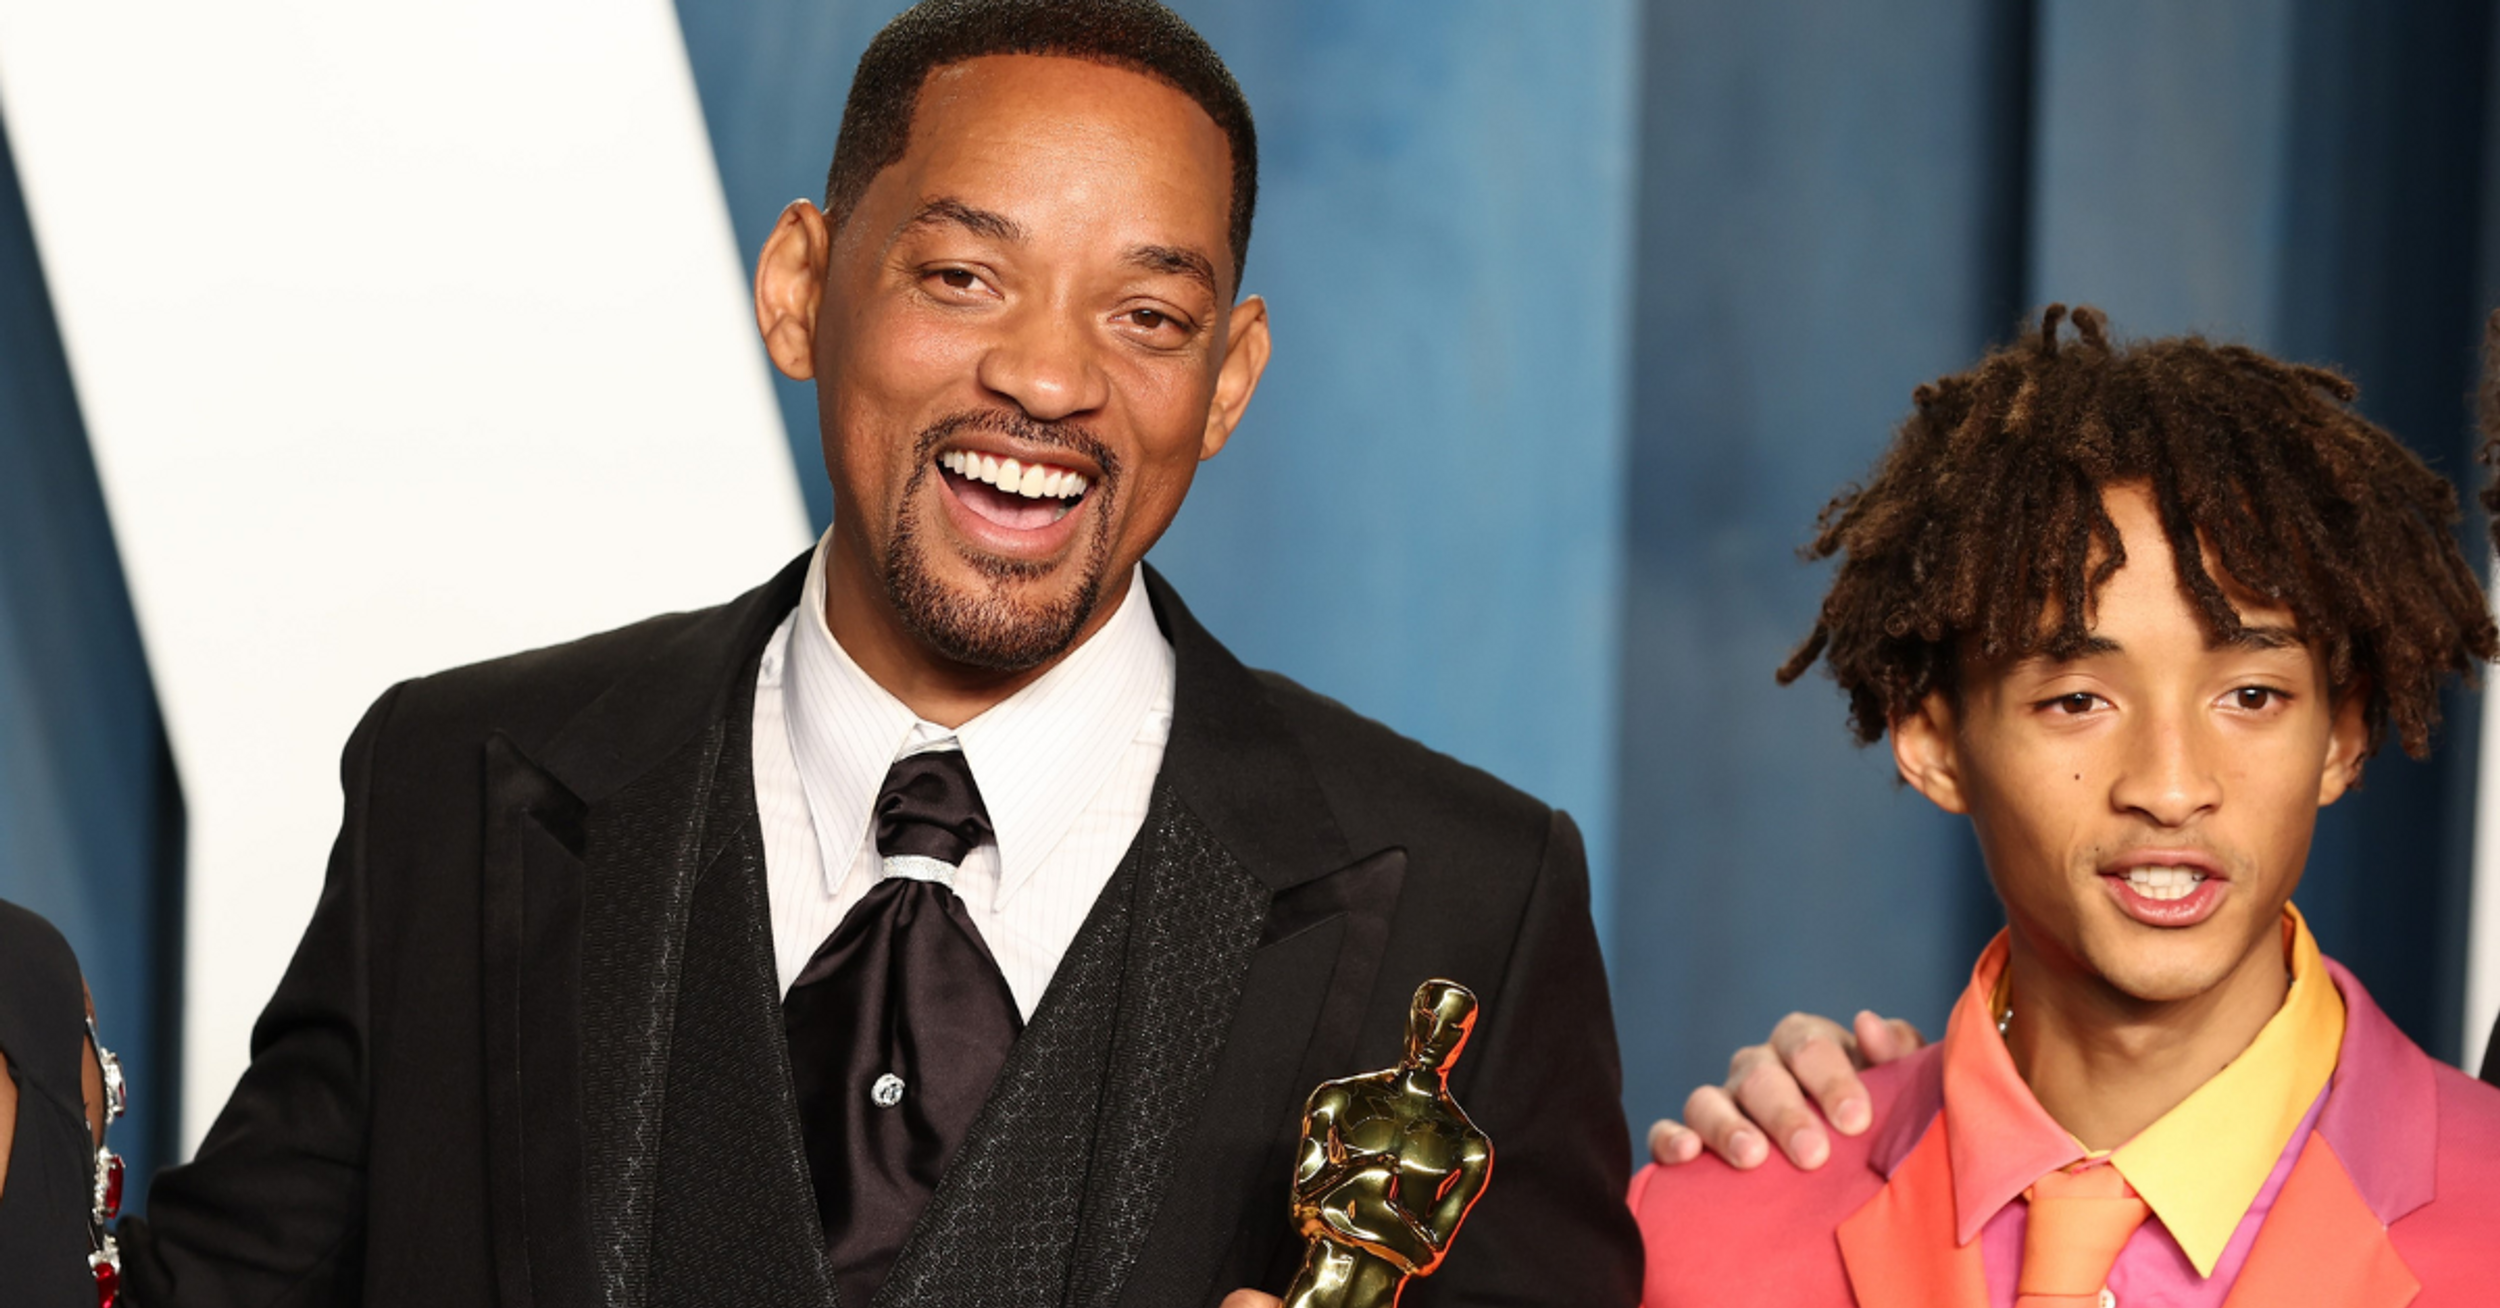 Jaden Smith Ignites Twitter With Cryptic Tweet After His Dad's Oscars Slap Shocks The World